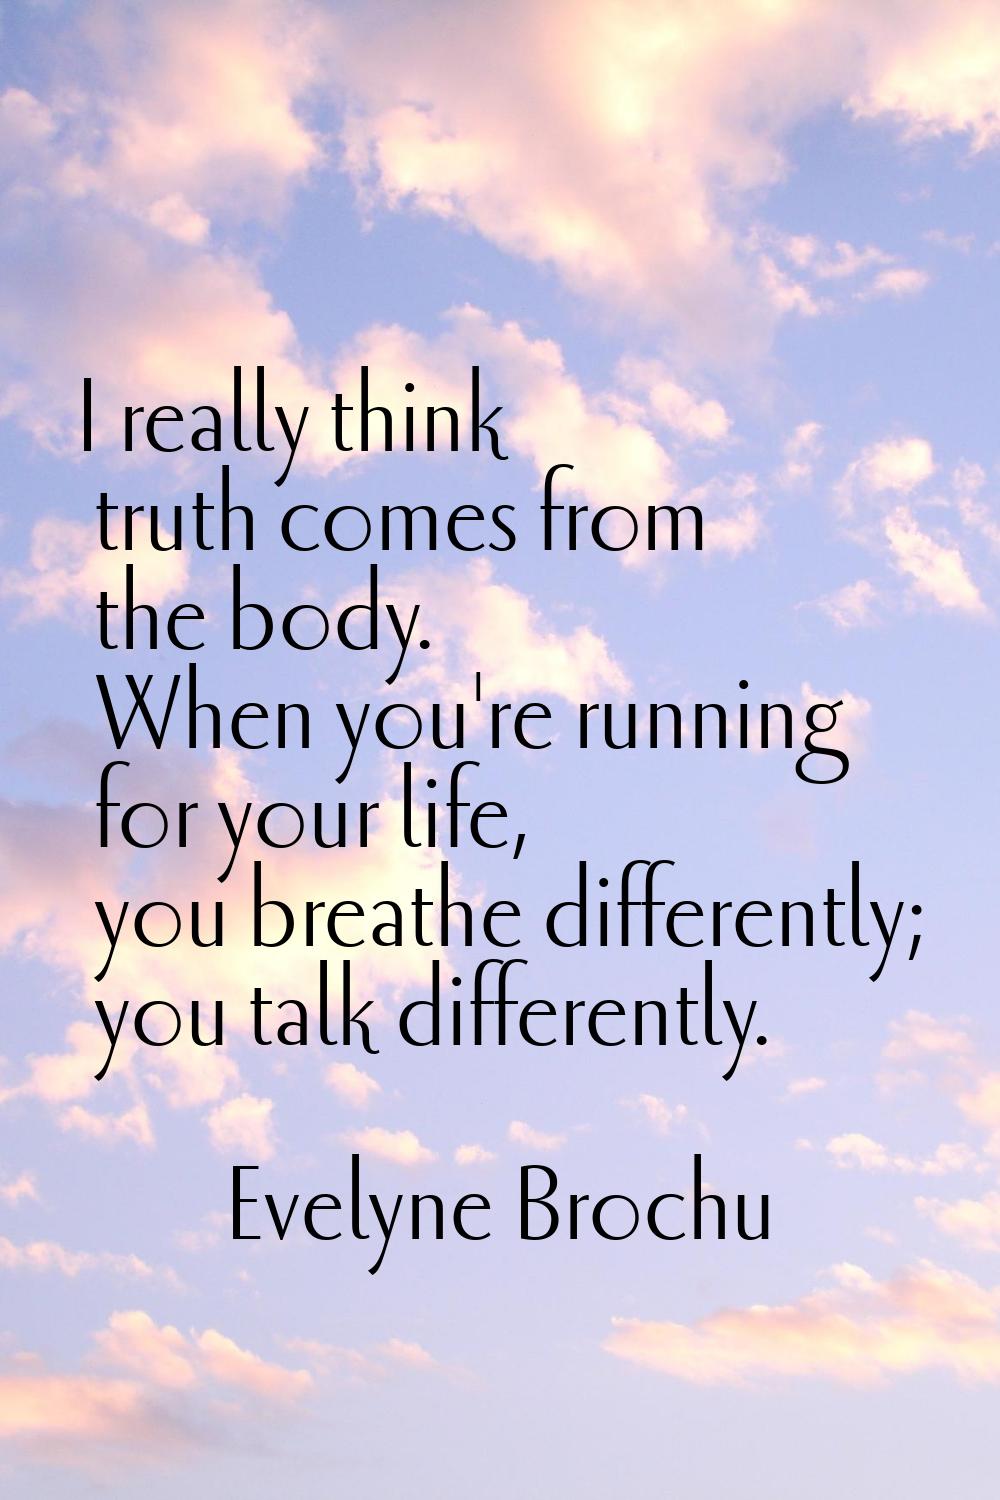 I really think truth comes from the body. When you're running for your life, you breathe differentl